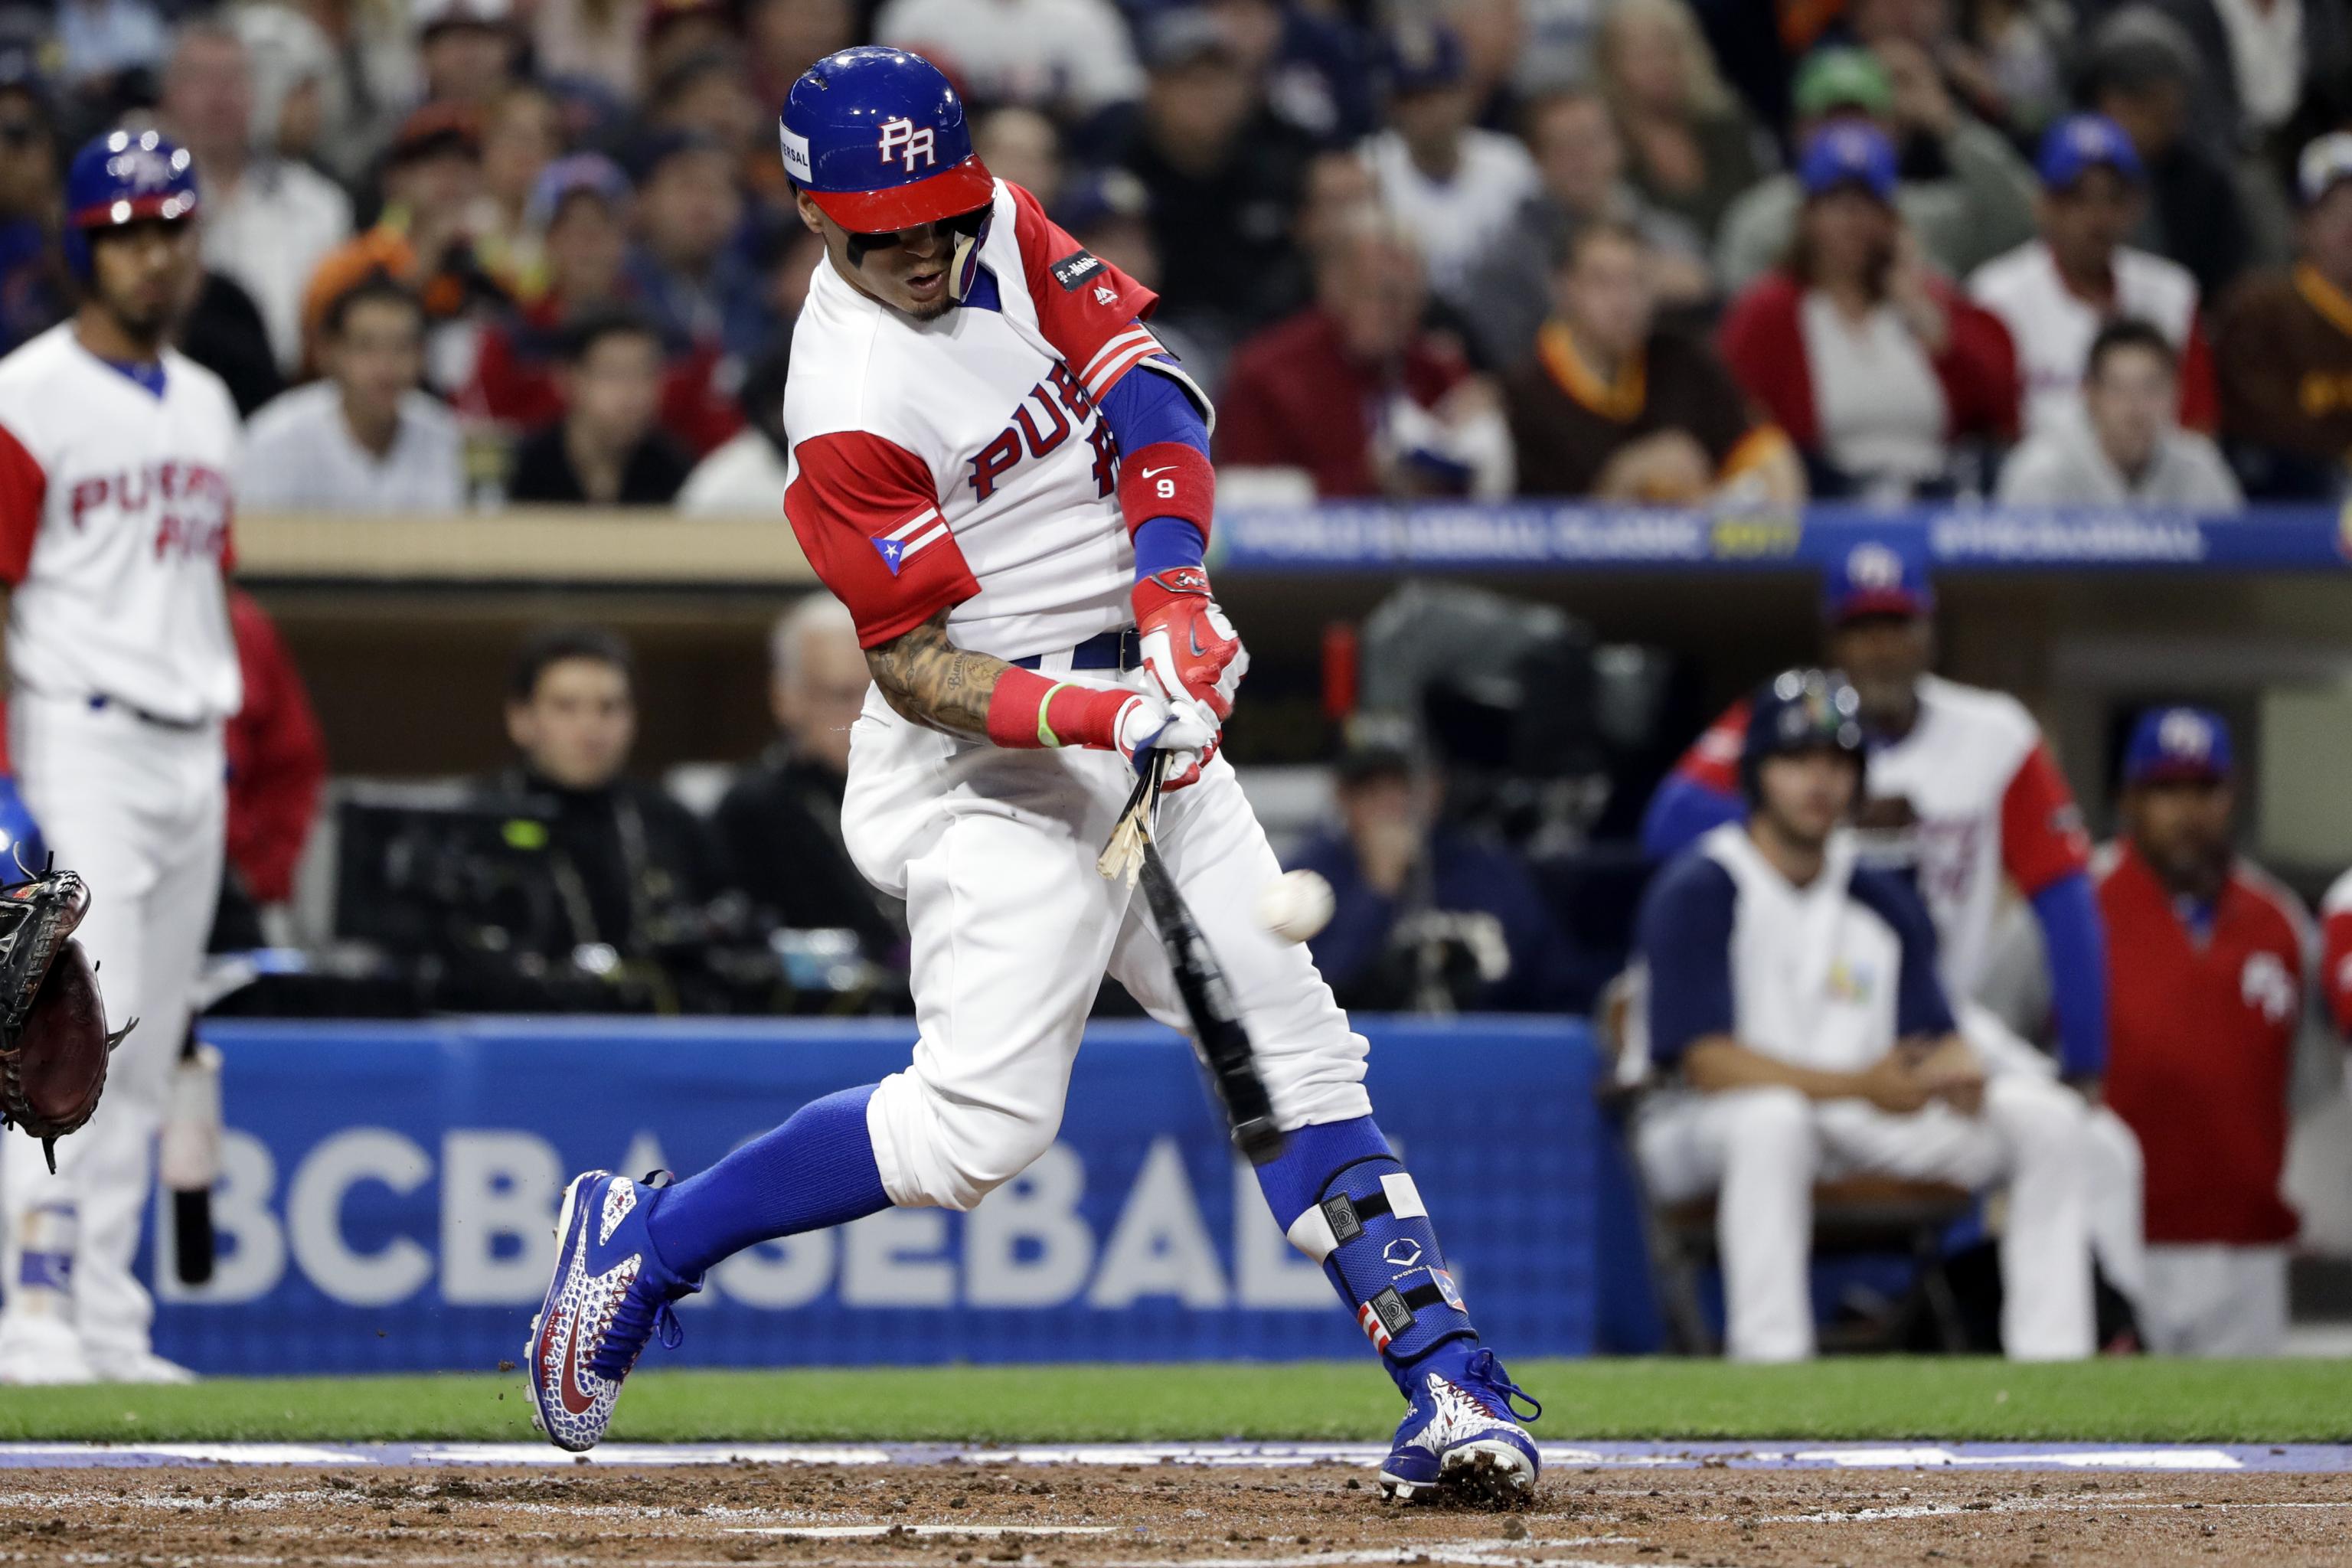 Puerto Rico is bringing a strong team to the World Baseball